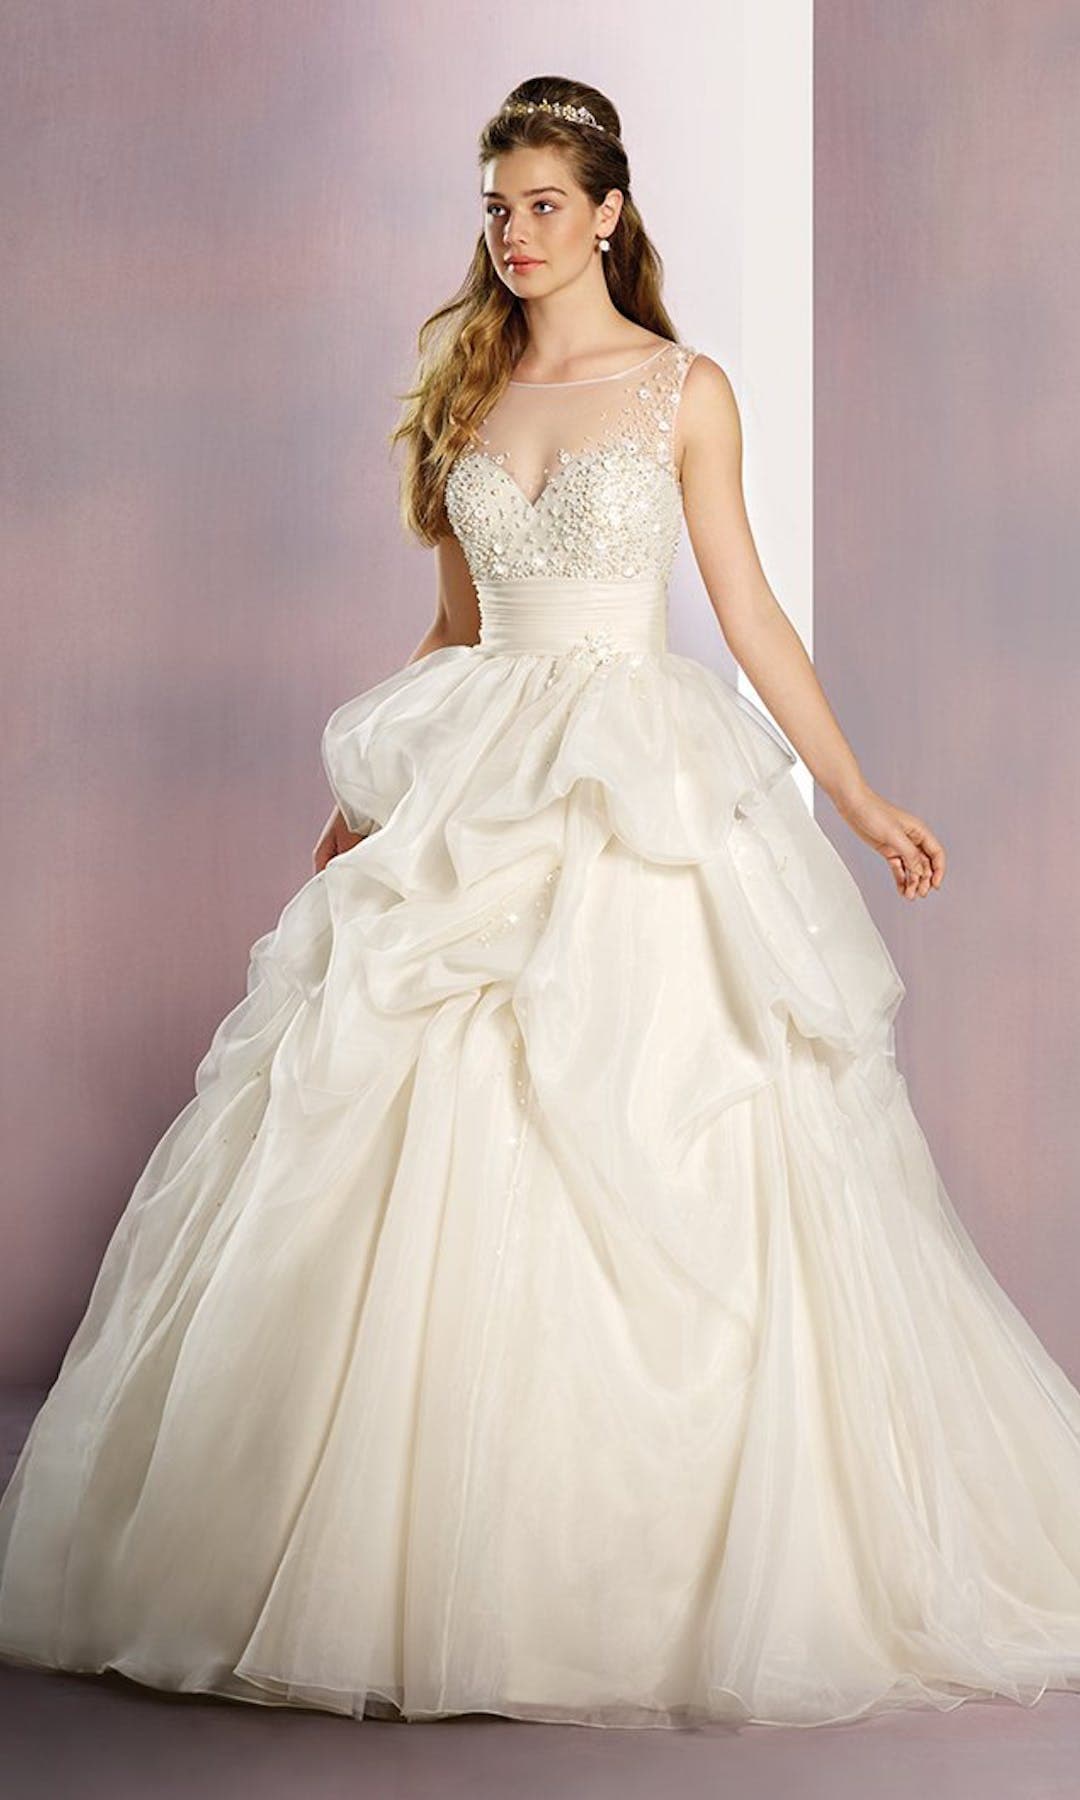 [For Rent ONLY] Sleeping Beauty Disney Fairy Tale Wedding Dress in Ivory /Gold (Ball Gown) - AA260 - Blossom Wedding